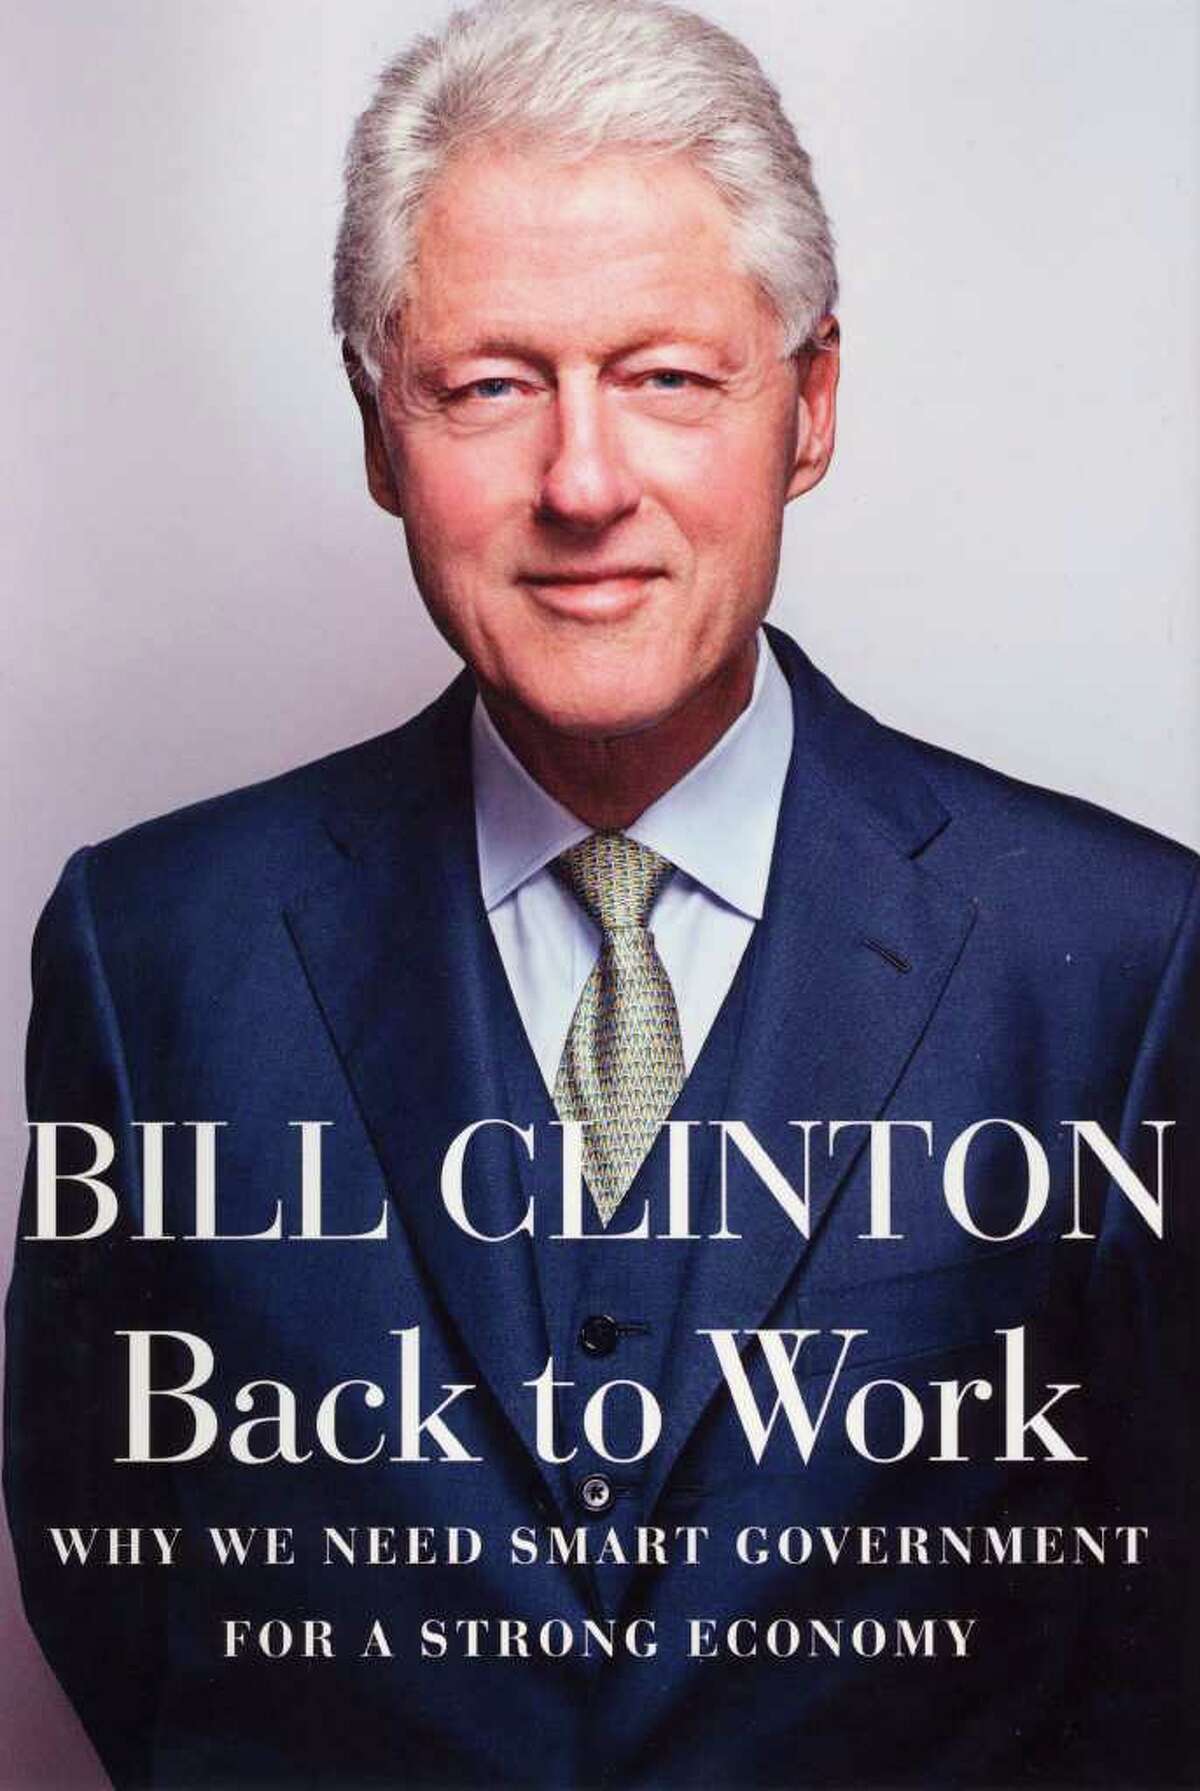 BOOK JACKET - Shows is a scanned book jacket image from "Back to Work" by former President Bill Clinton. The book is scheduled for release next Tuesday by Knopf. (AP Photo/Knopf)